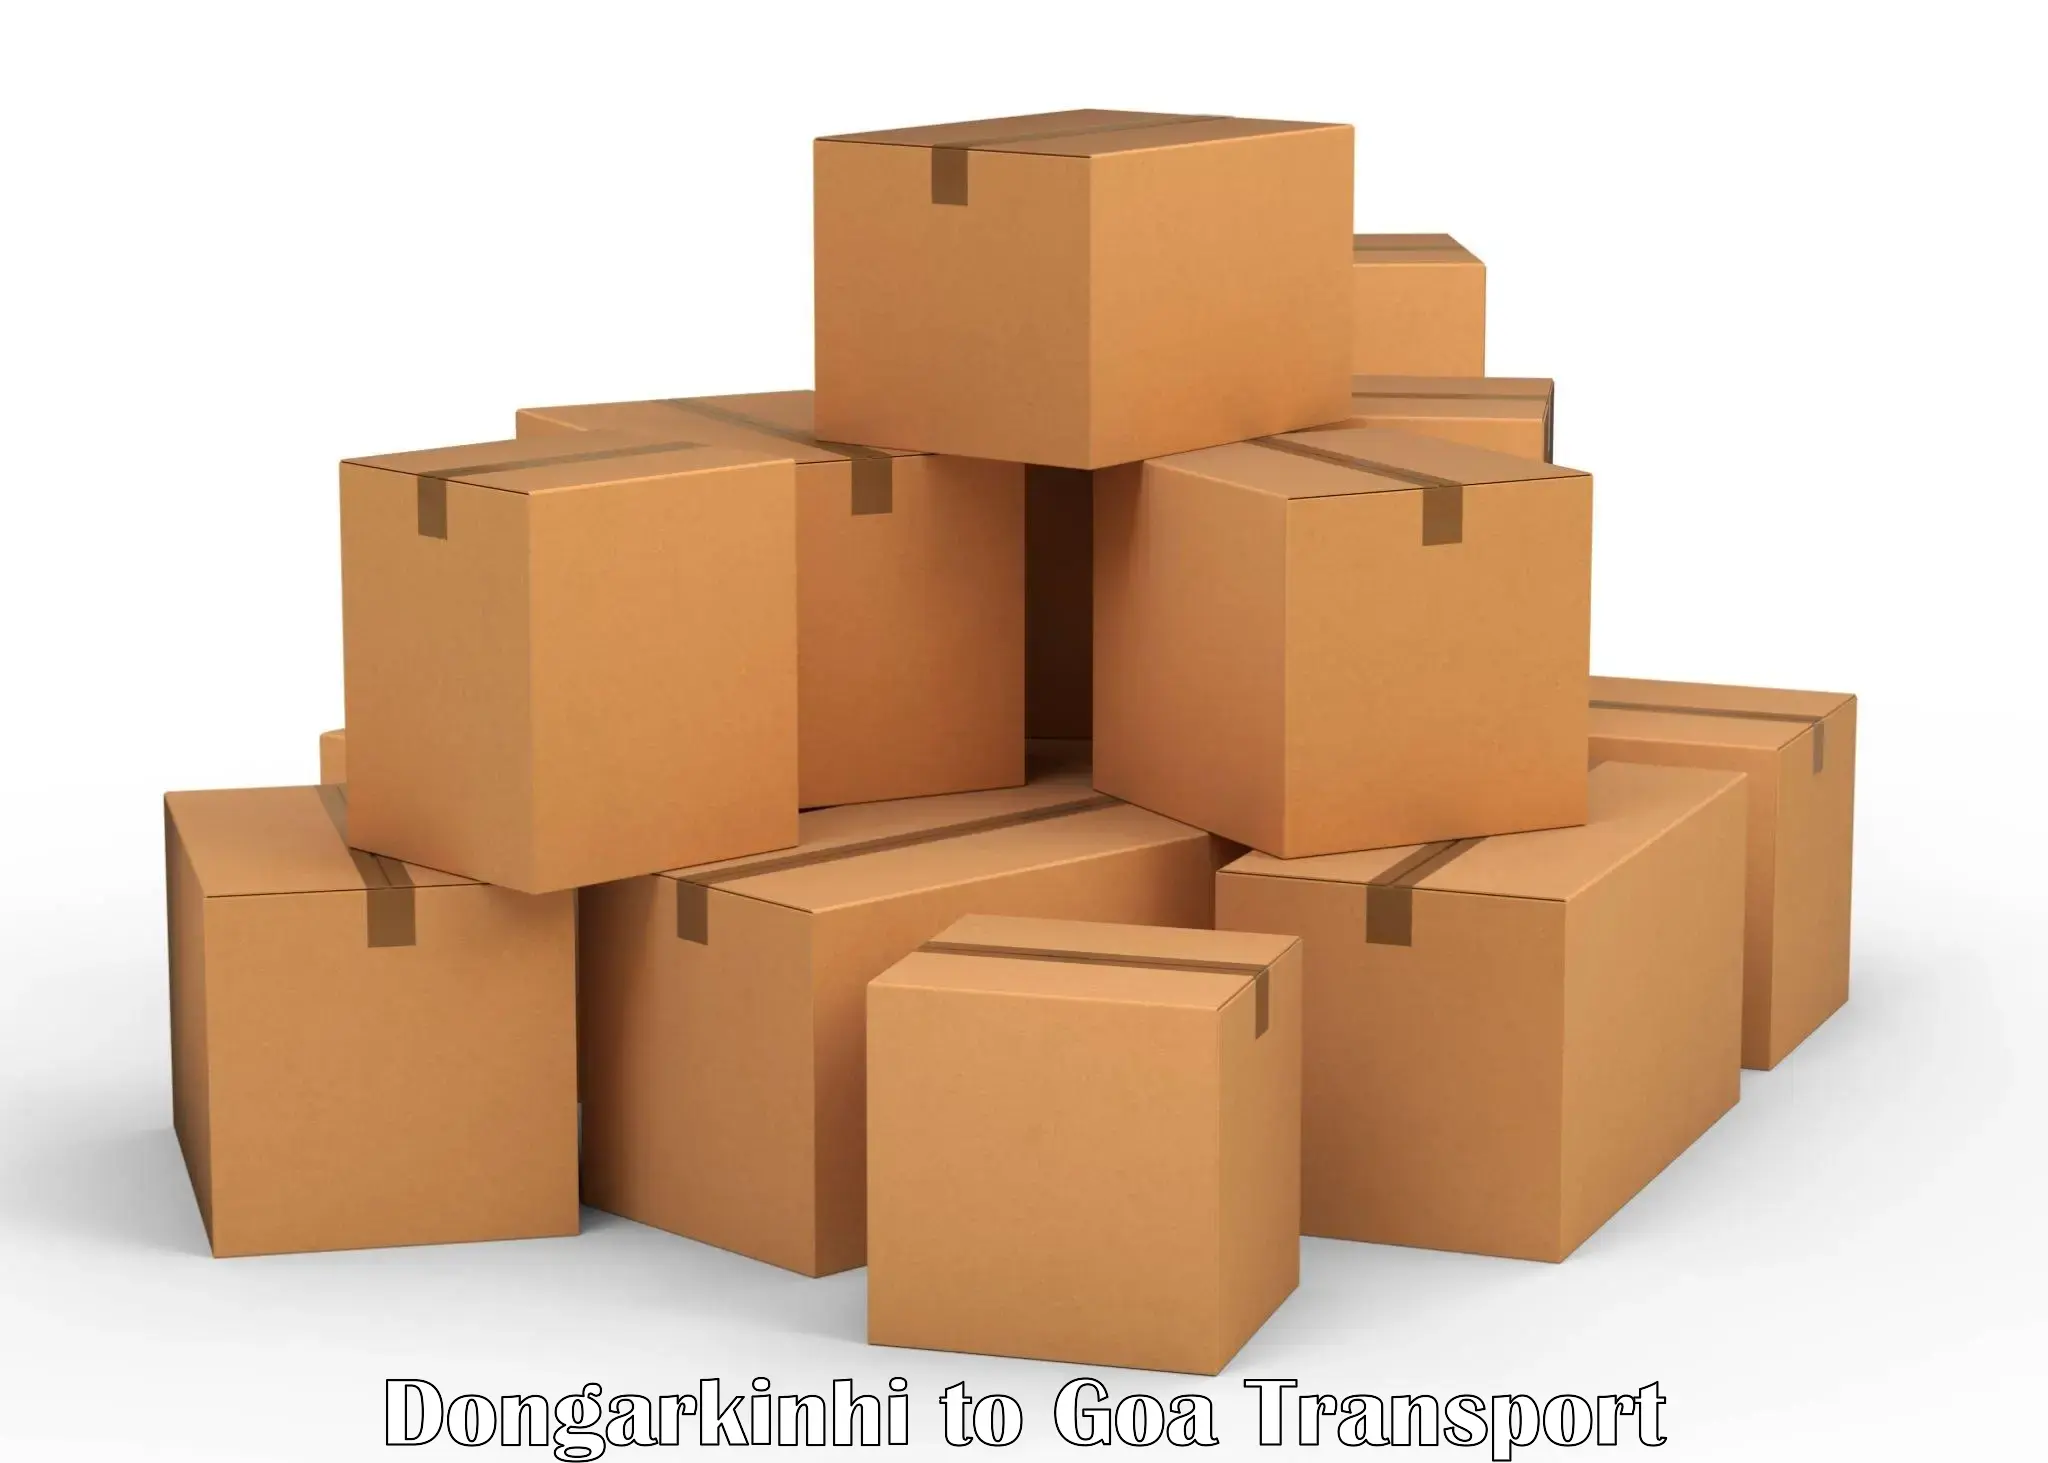 Transportation solution services in Dongarkinhi to Goa